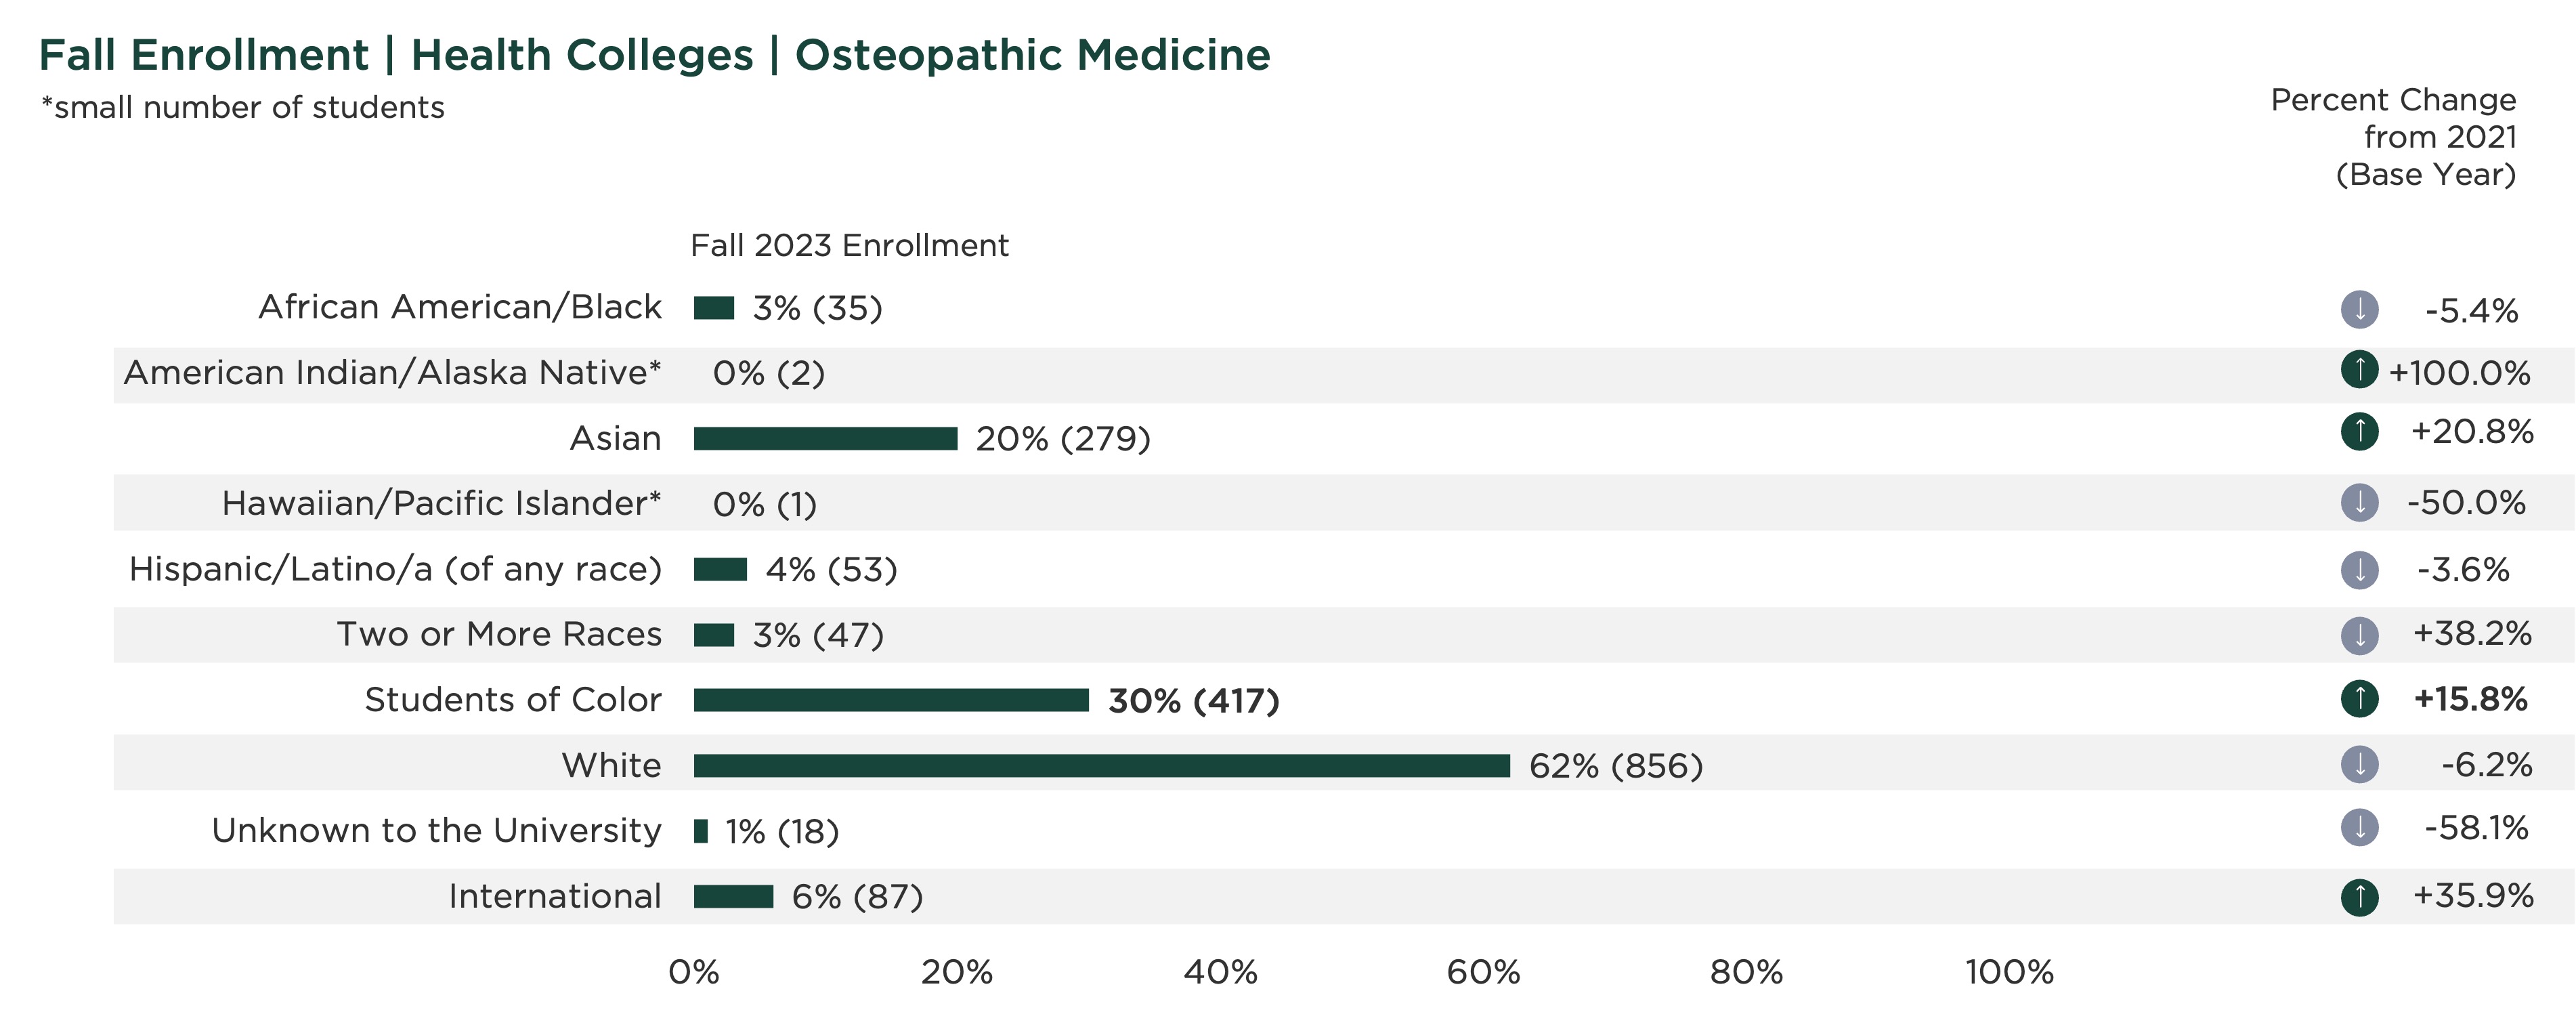 graph showing fall enrollment by race and ethnicity for the College of Osteopathic Medicine